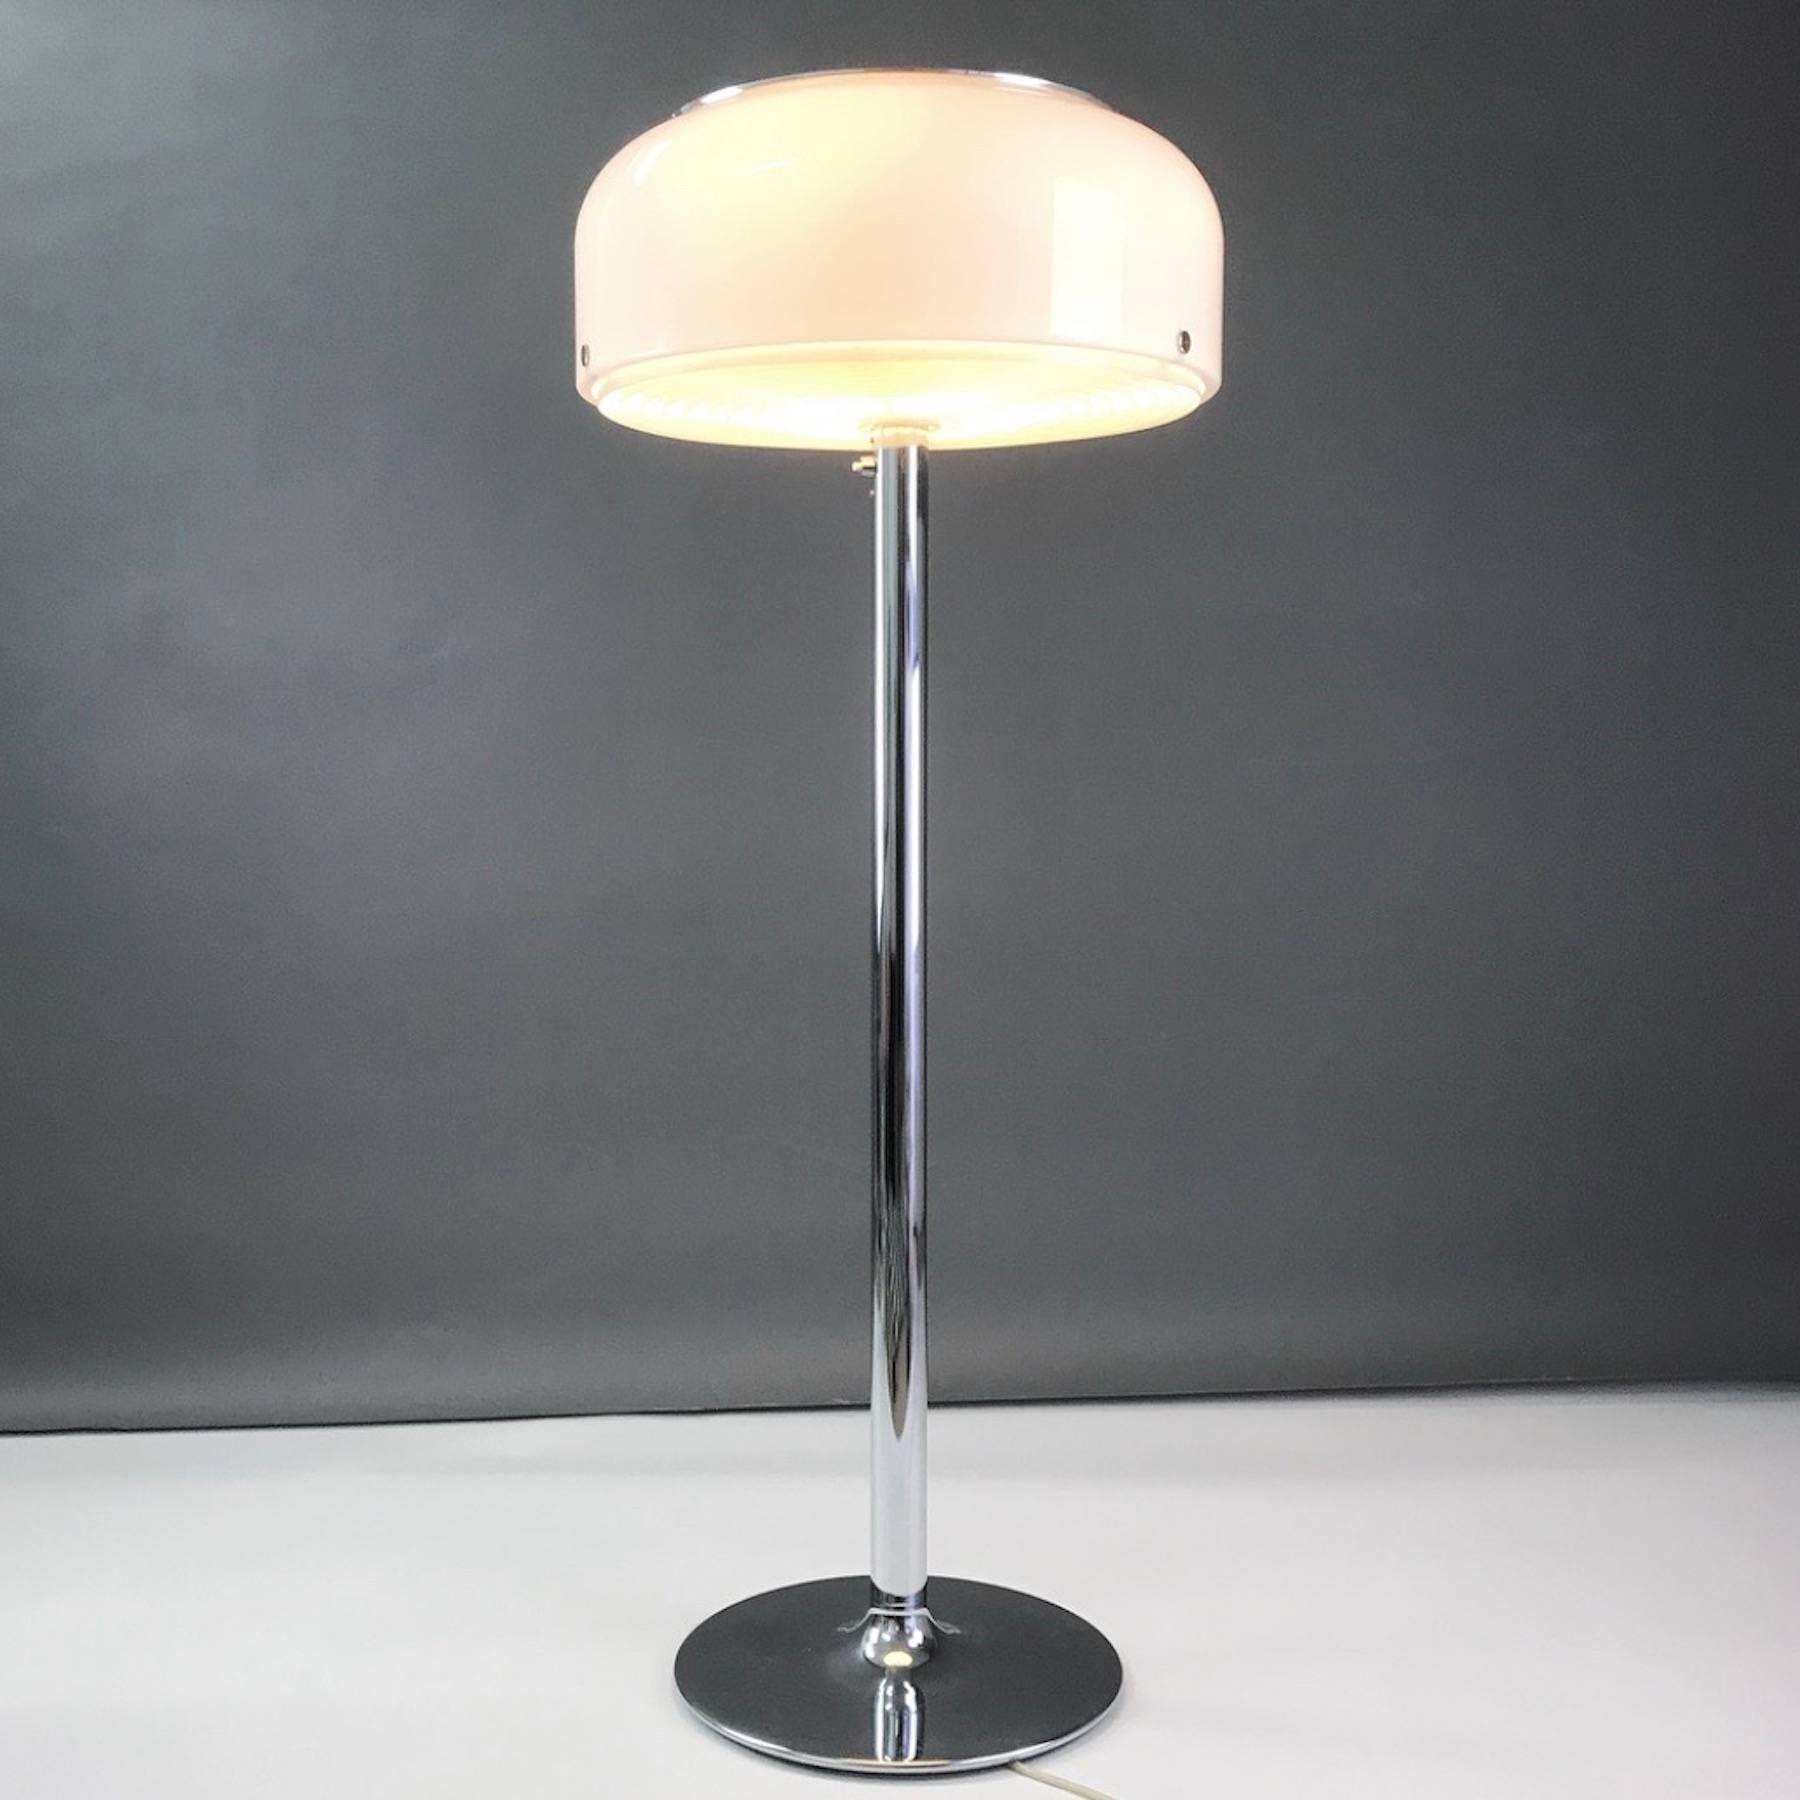 This amazing floor lamp is one of our favorites. Elegant, majestic and contemporary covers this beauty the best. 

The big white shade gives a lovely warm light when lit and the chrome stem and white shade will fit in almost every home; you can go